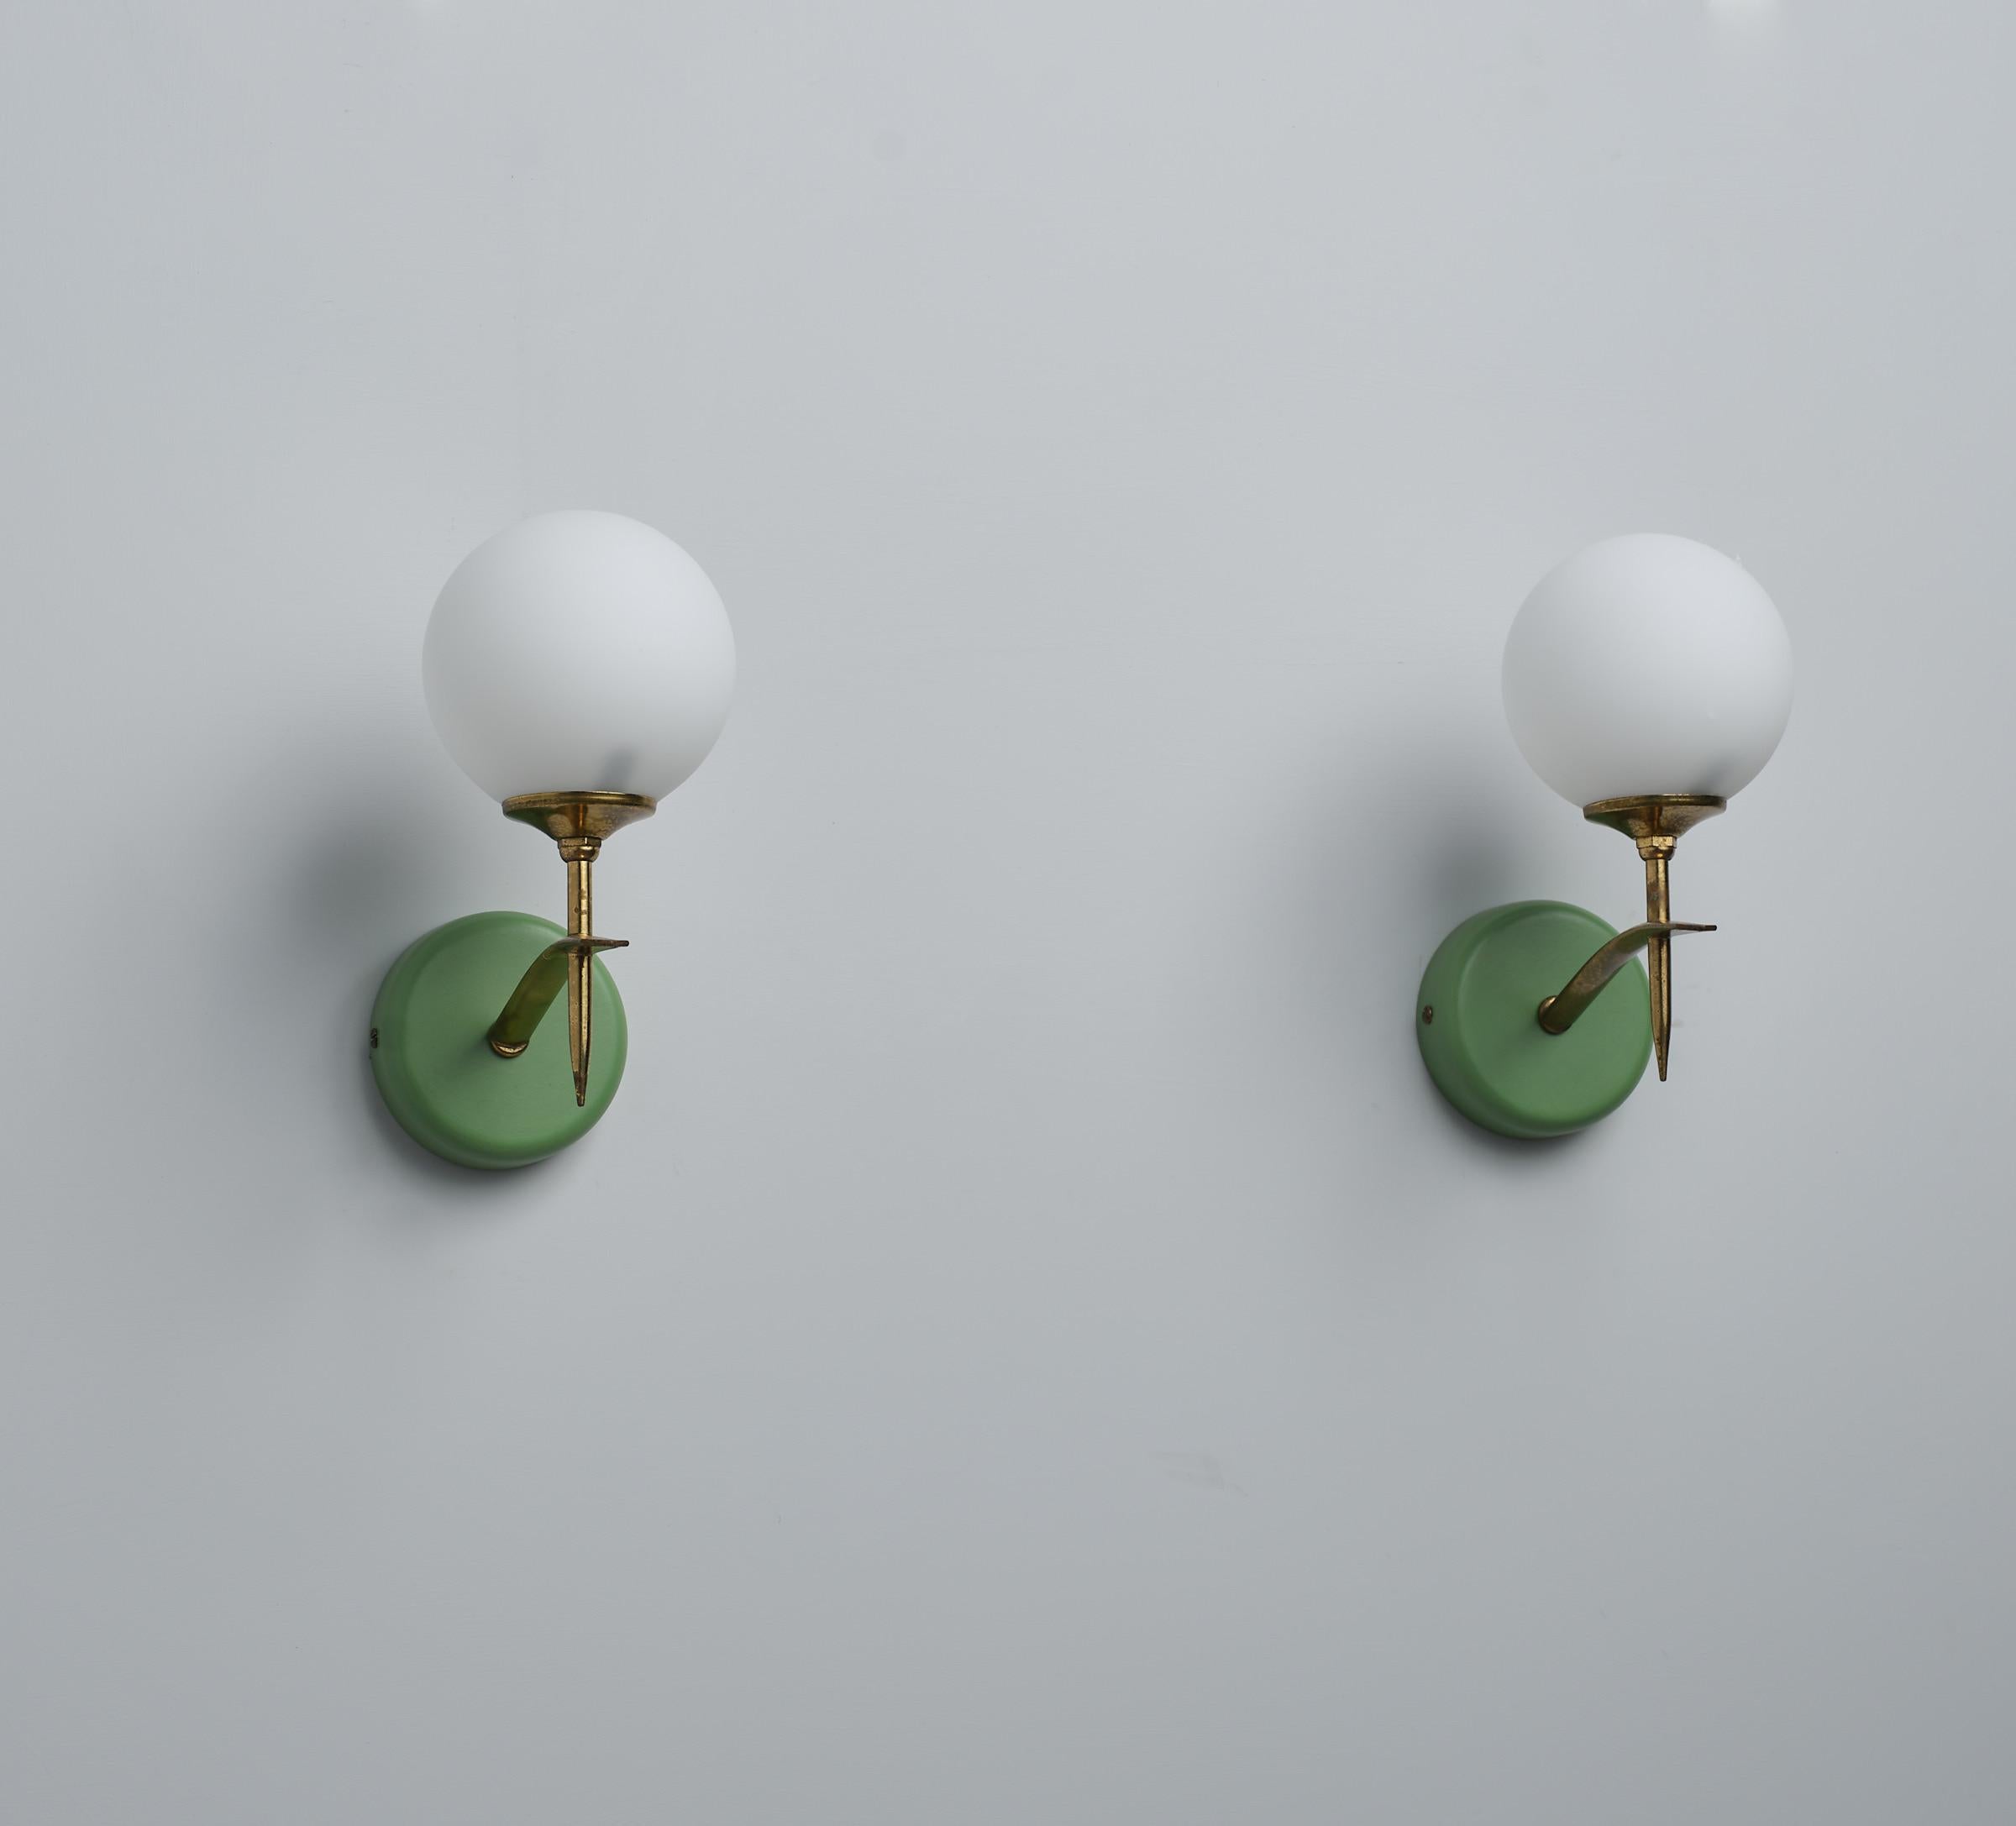 This sophisticated pair of Italian wall sconces, designed in the 1950s, captures the essence of modernist elegance. Constructed from brass with an original patina that adds character and depth, the sconces are mounted on brass wall fixtures,